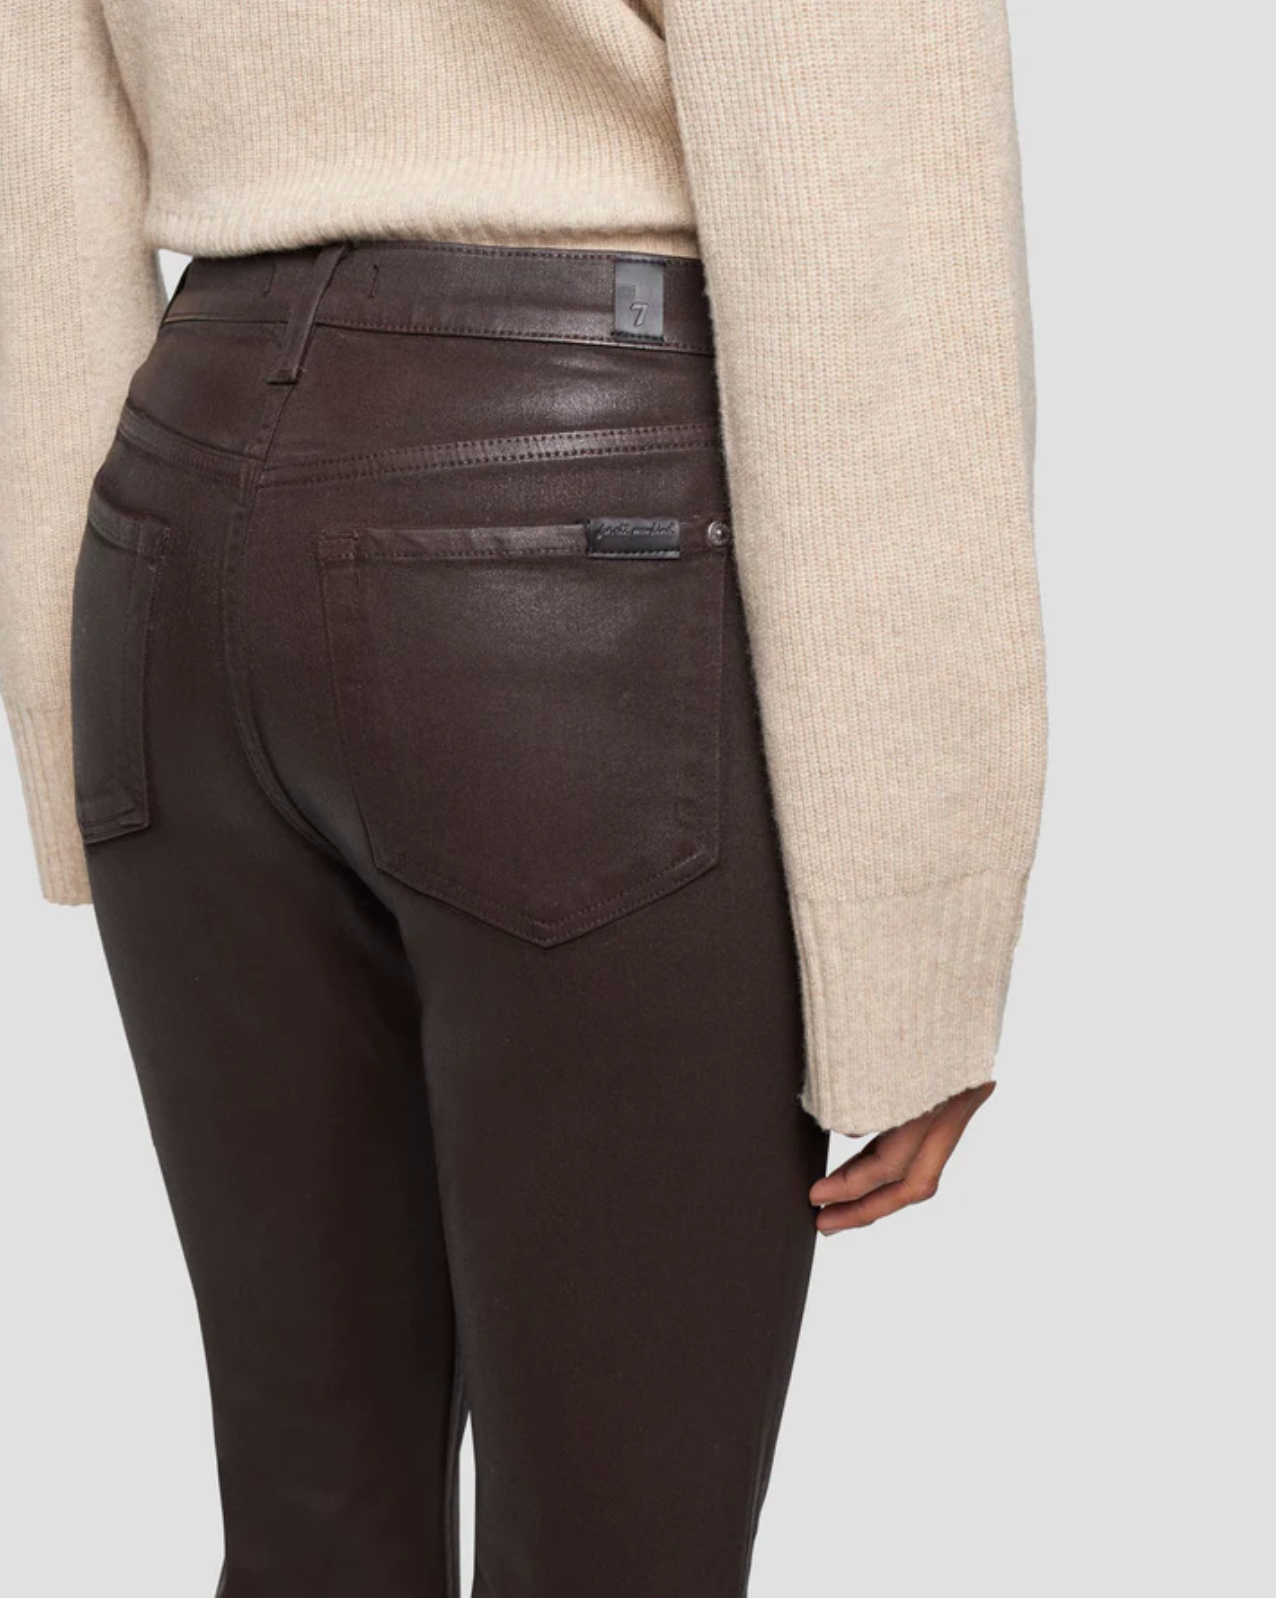 rear pocket close up view of 7 for all mankind's high waist slim kick coated pant in chocolate brown